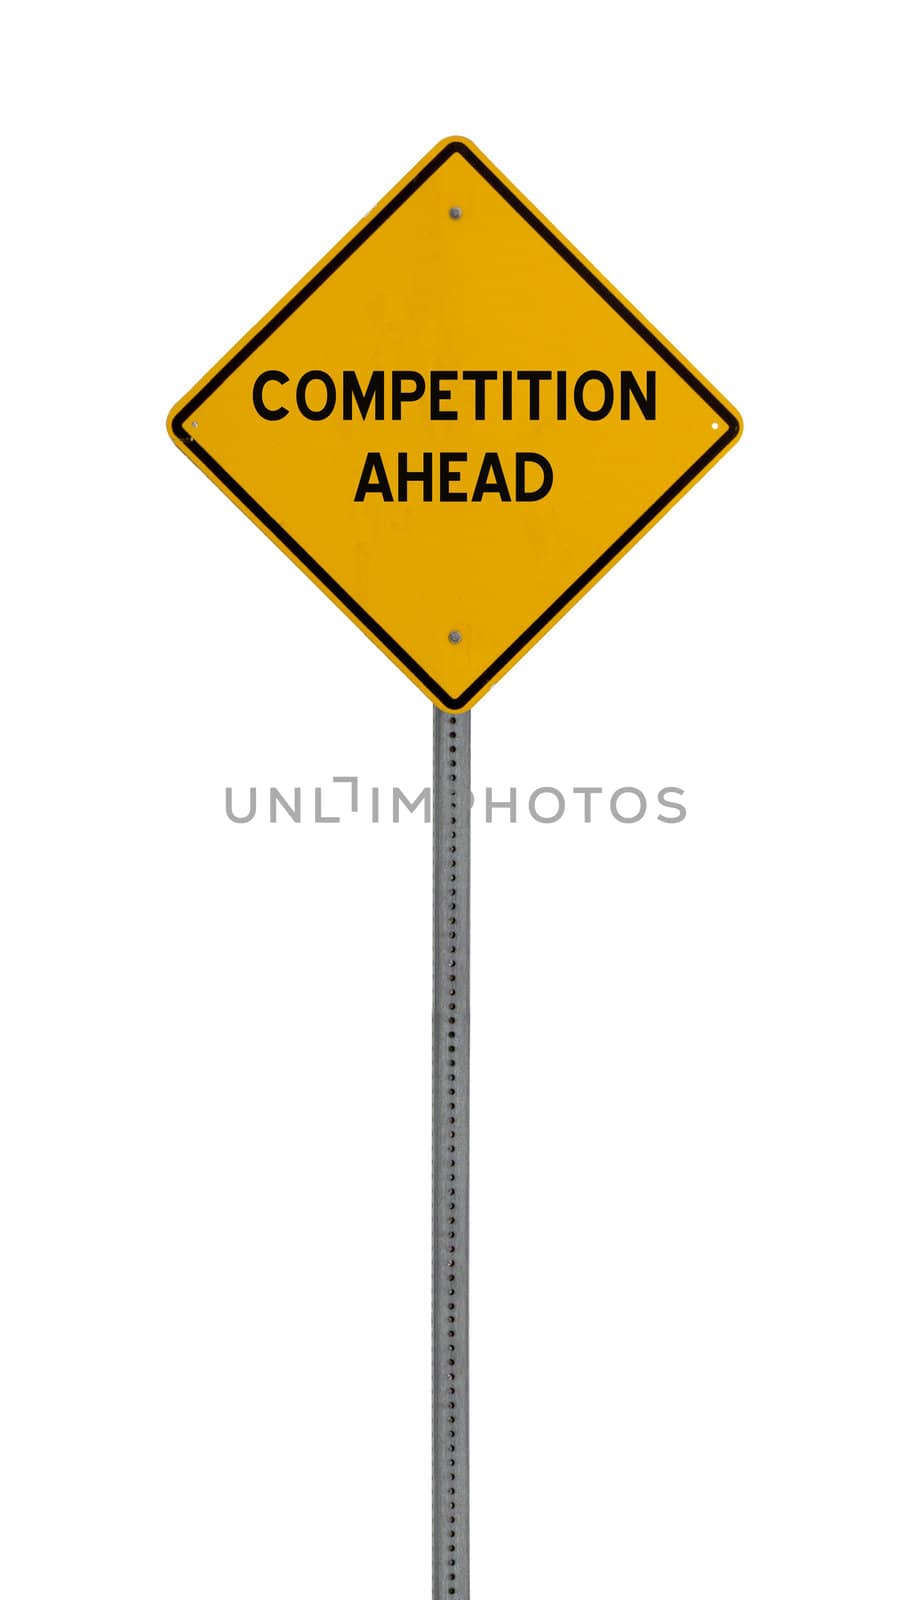 competition ahead - Yellow road warning sign by jeremywhat